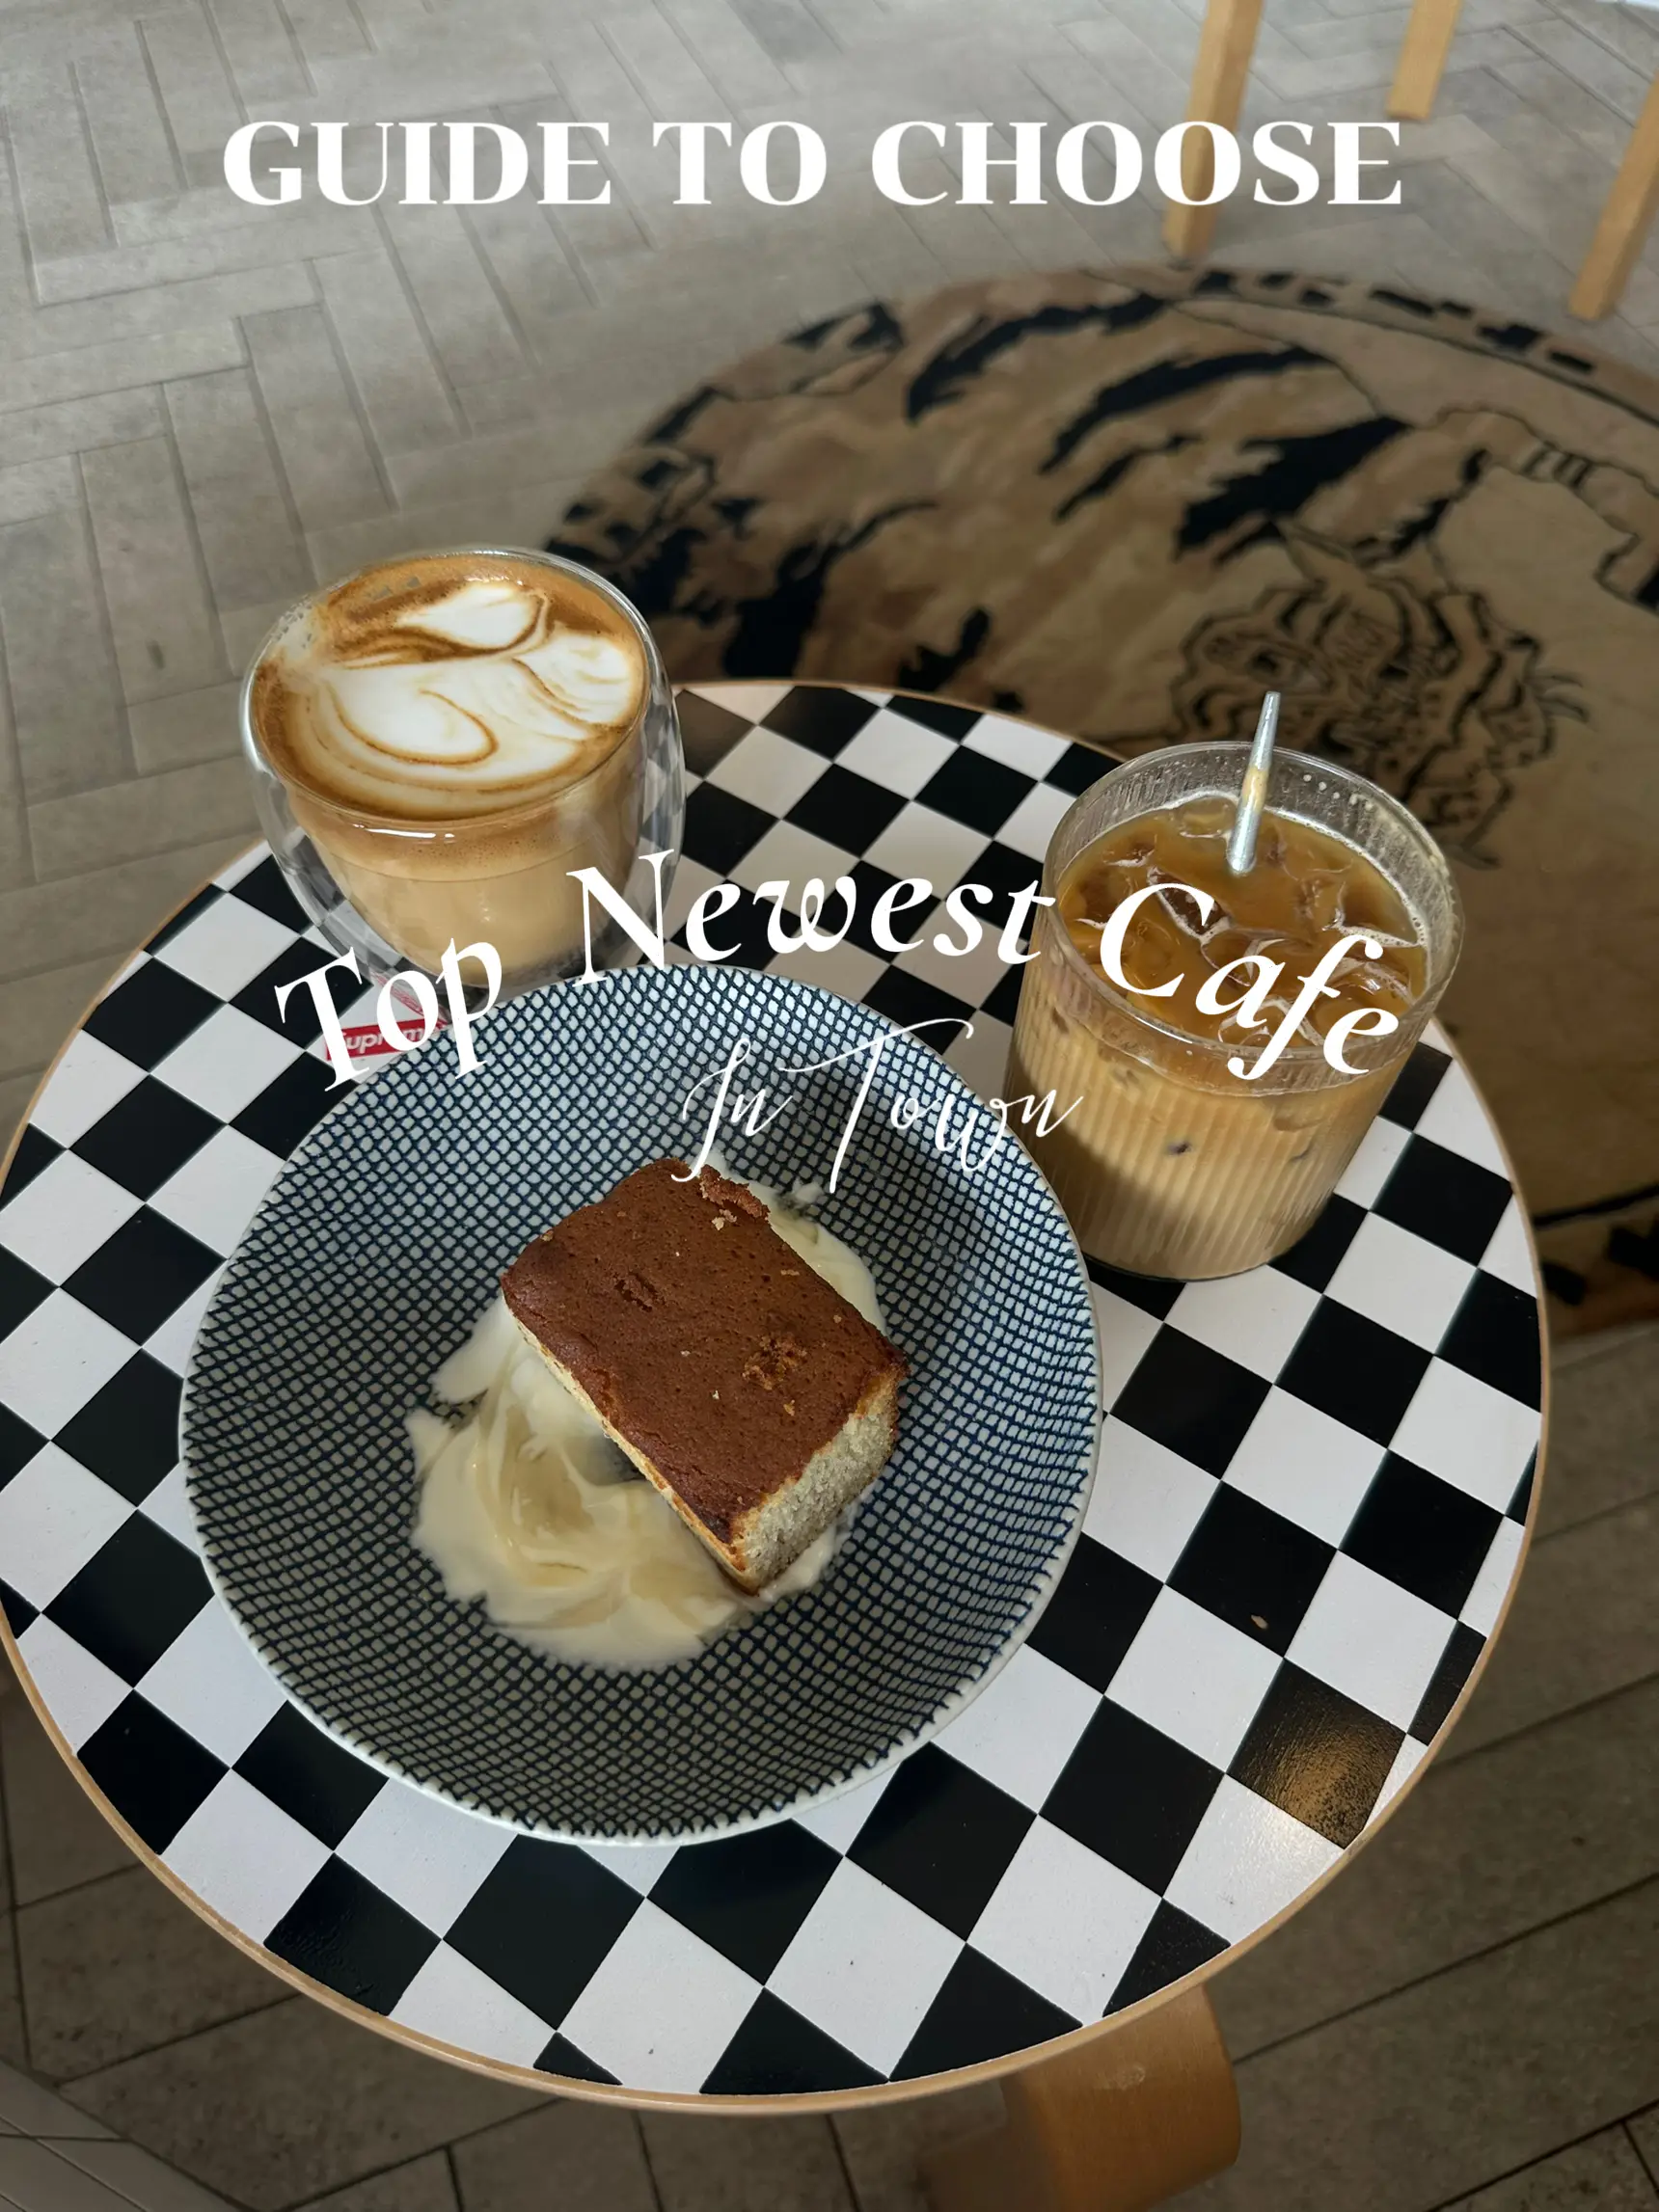 GUIDE TO CHOOSE - TOP NEWEST CAFE IN TOWN's images